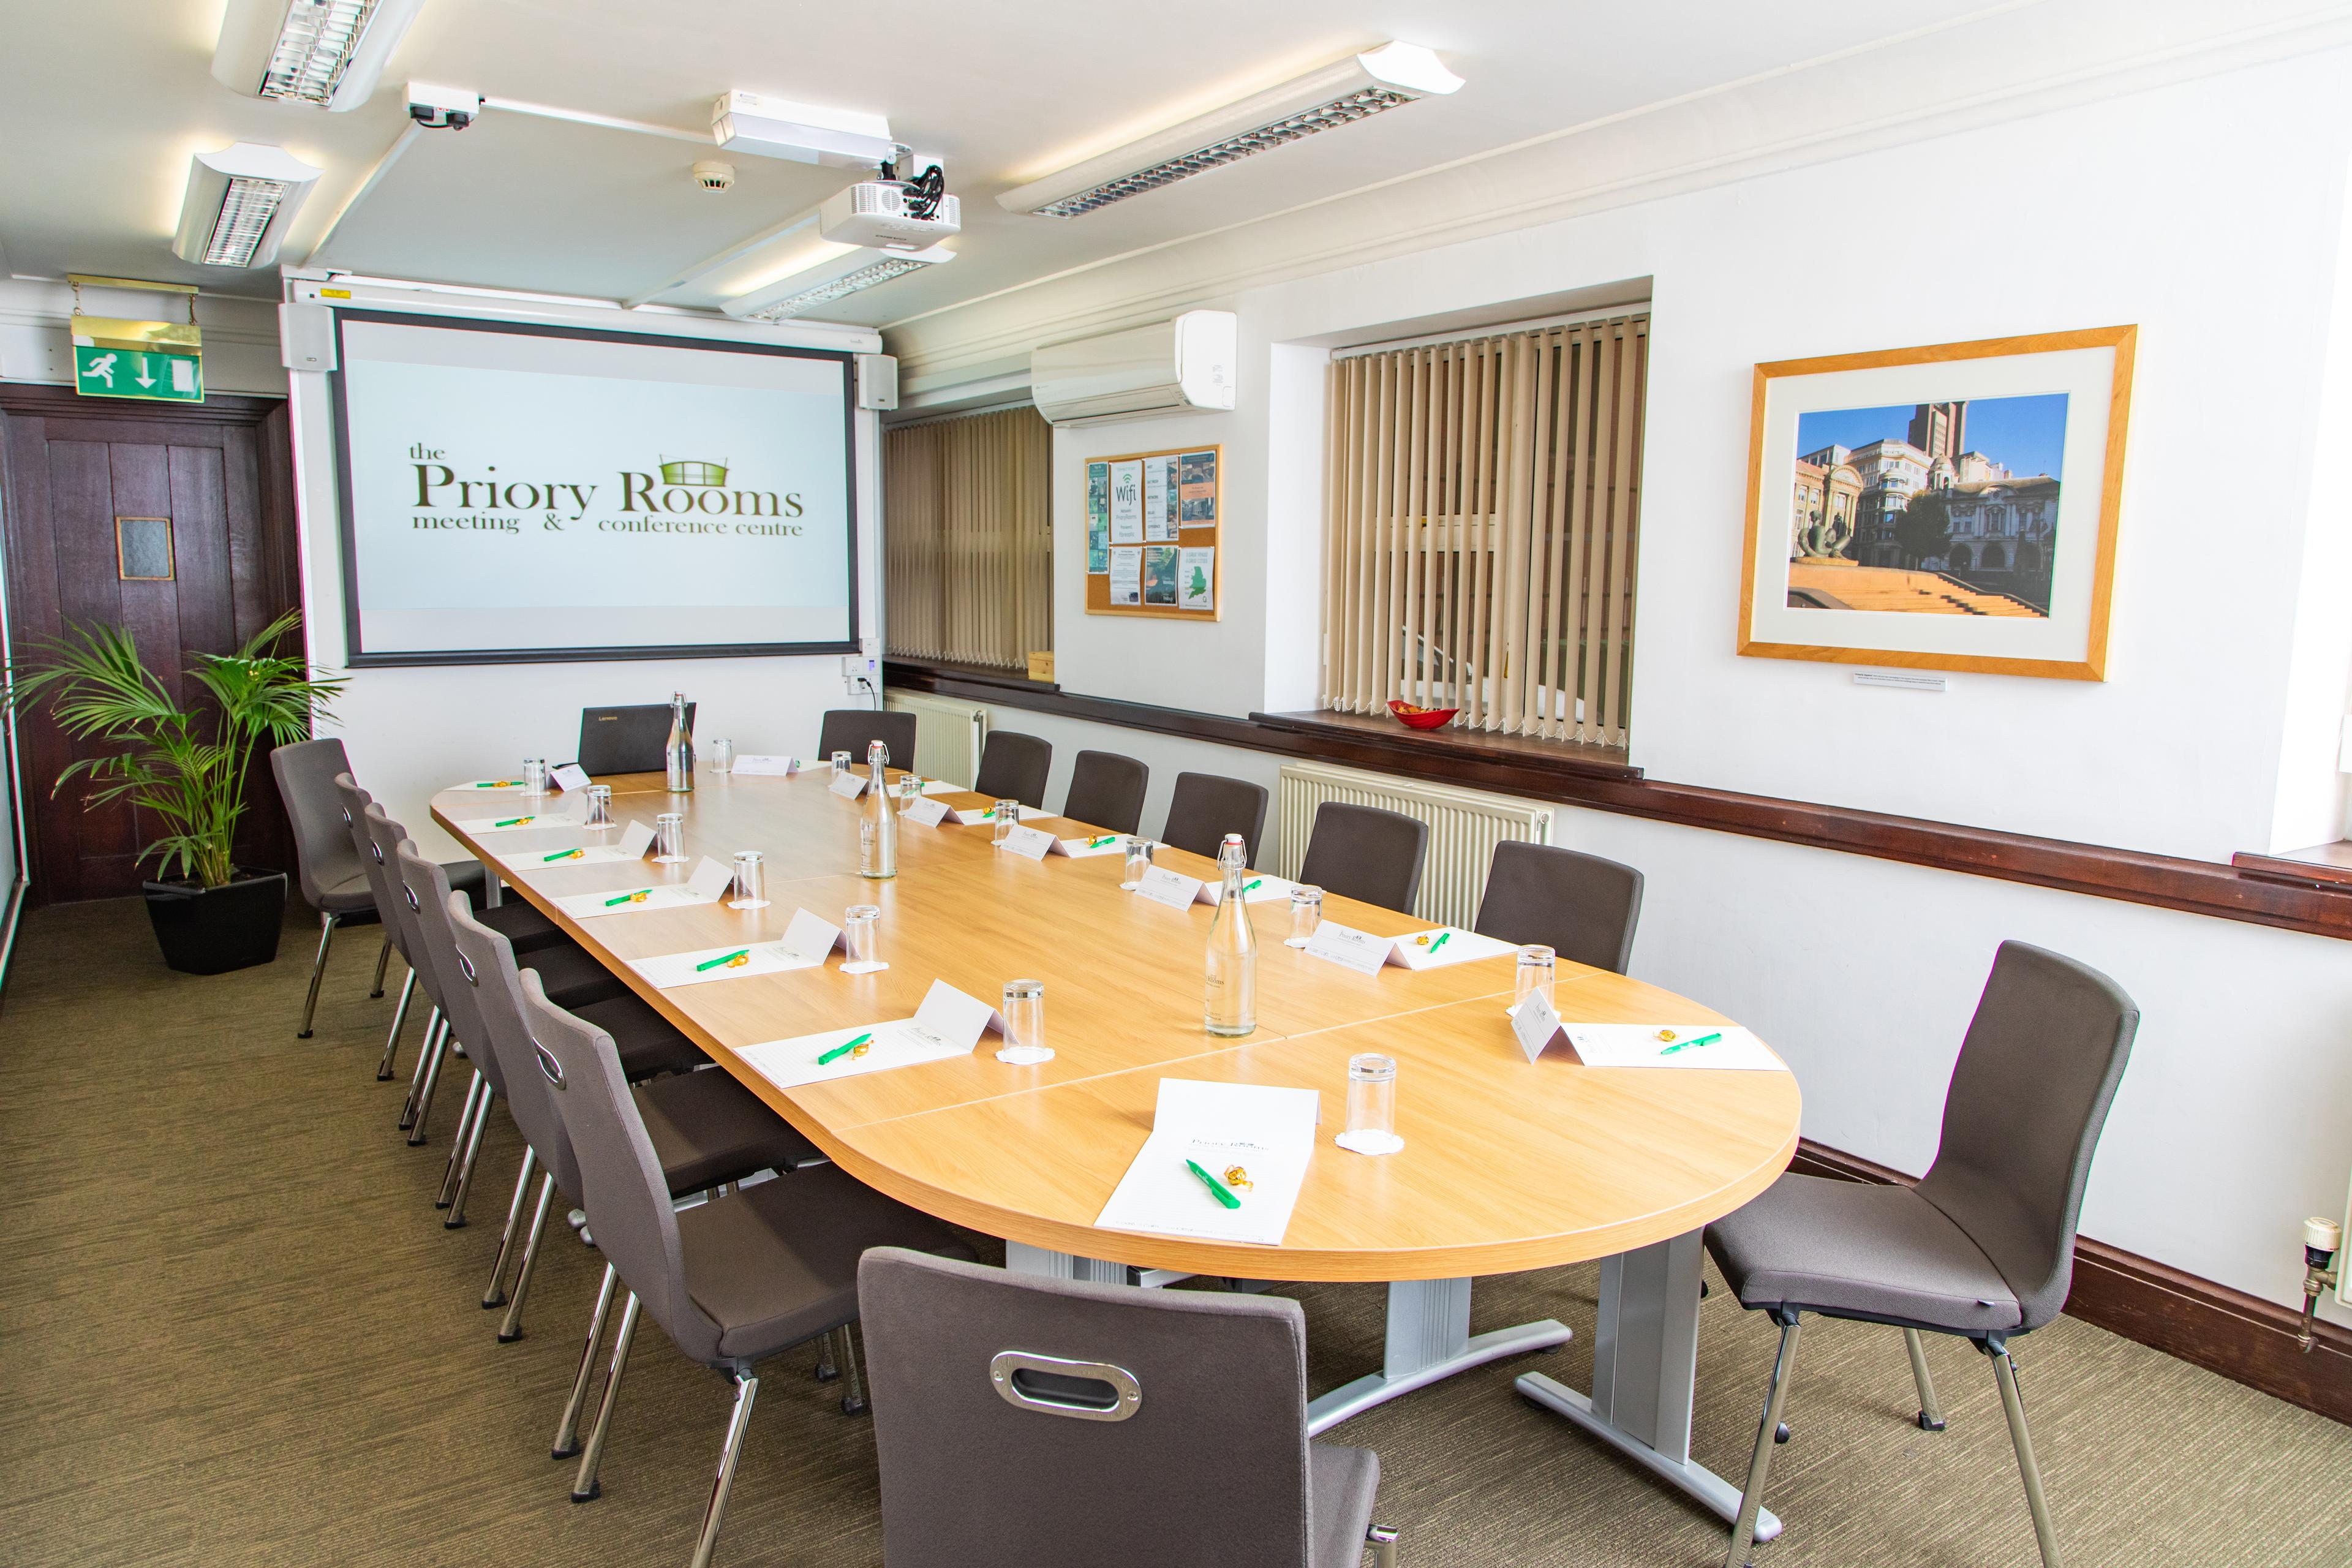 Lloyd Room, The Priory Rooms Meeting & Conference Centre photo #1